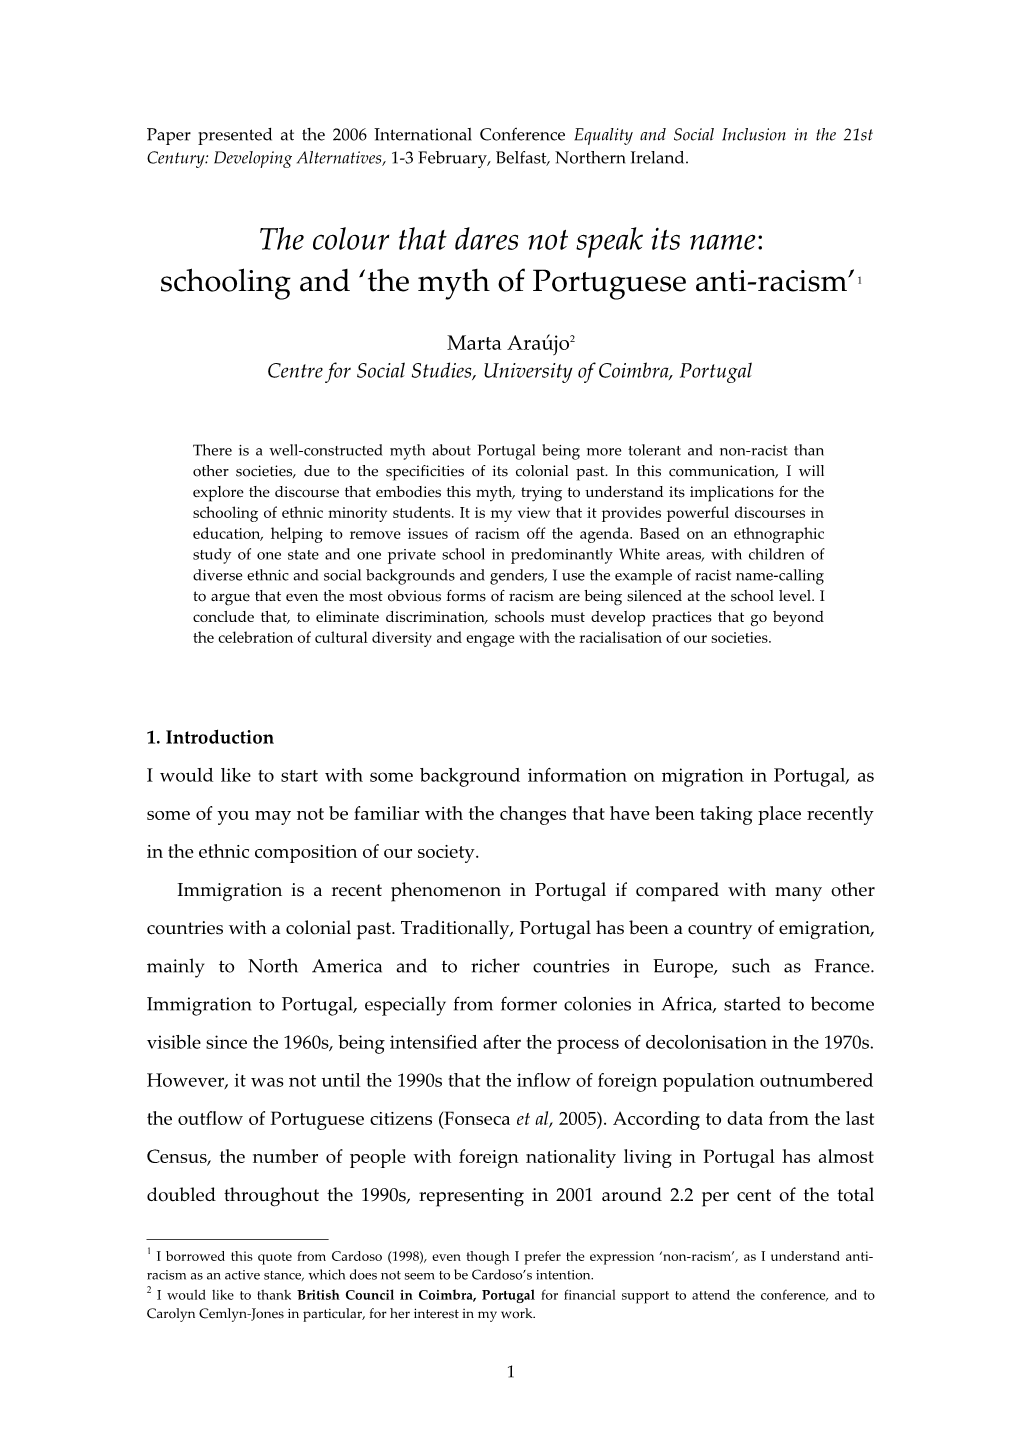 The Myth of Portuguese Anti-Racism